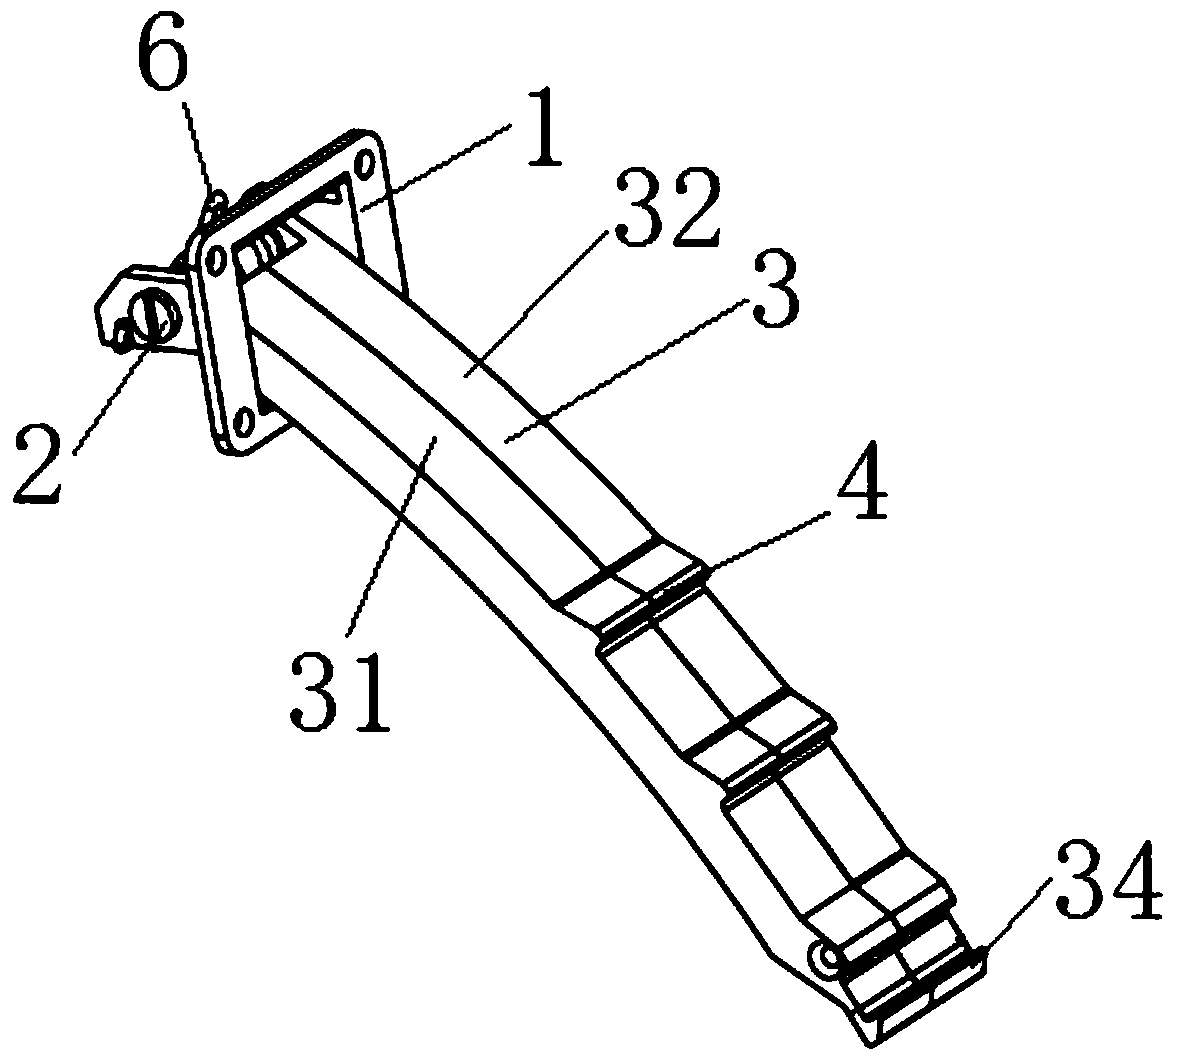 A support locking mechanism for notebook computer